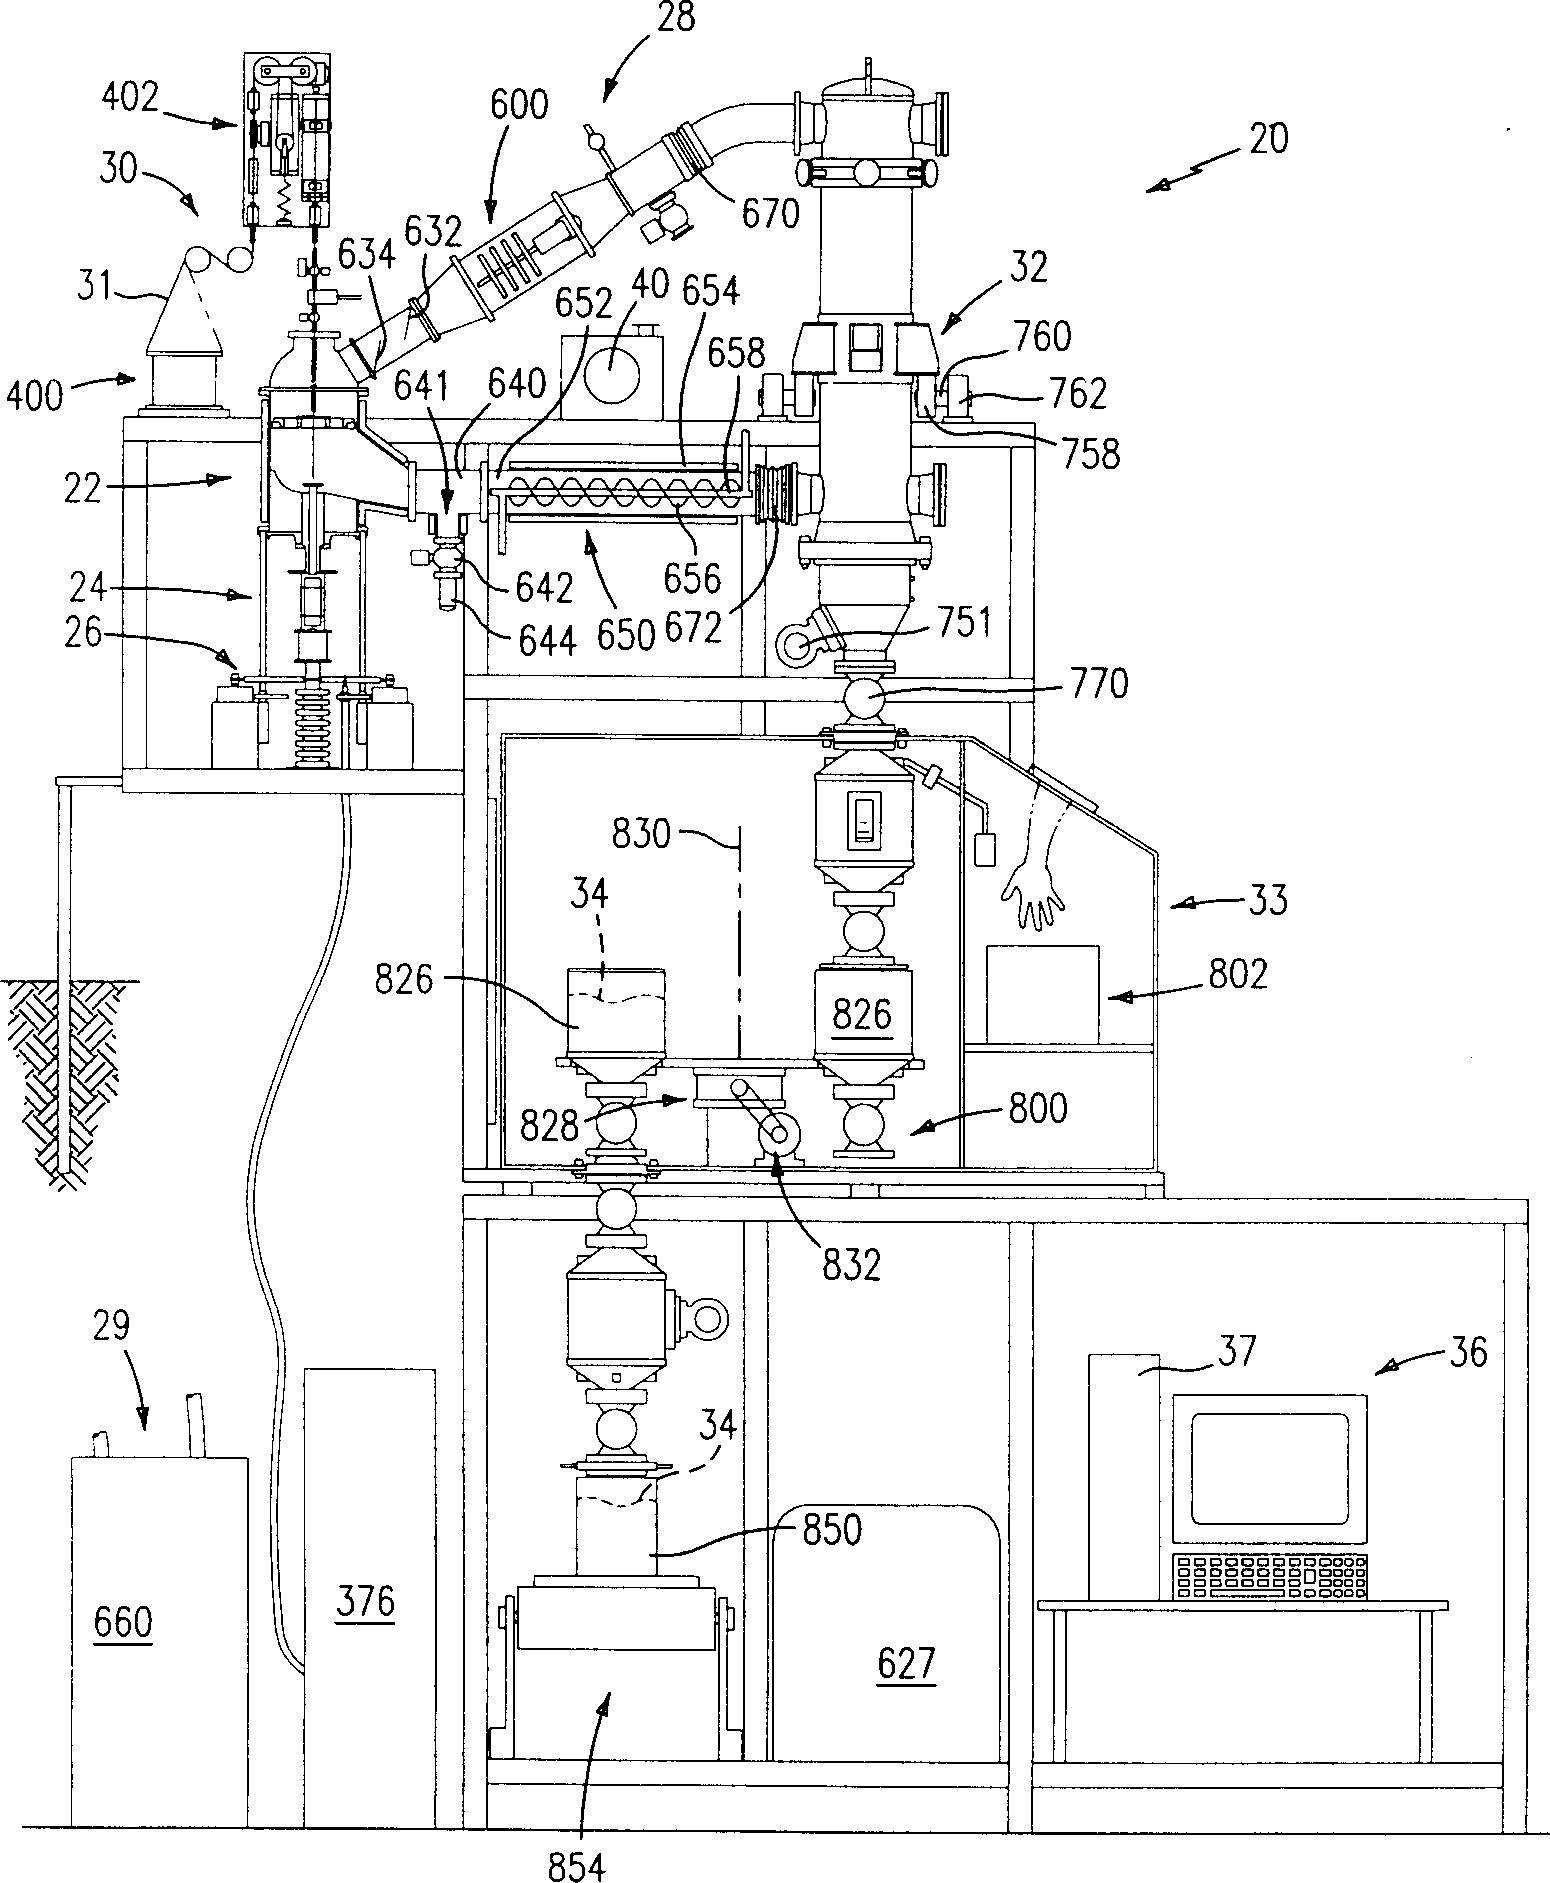 Apparatus and methods for the production of powders